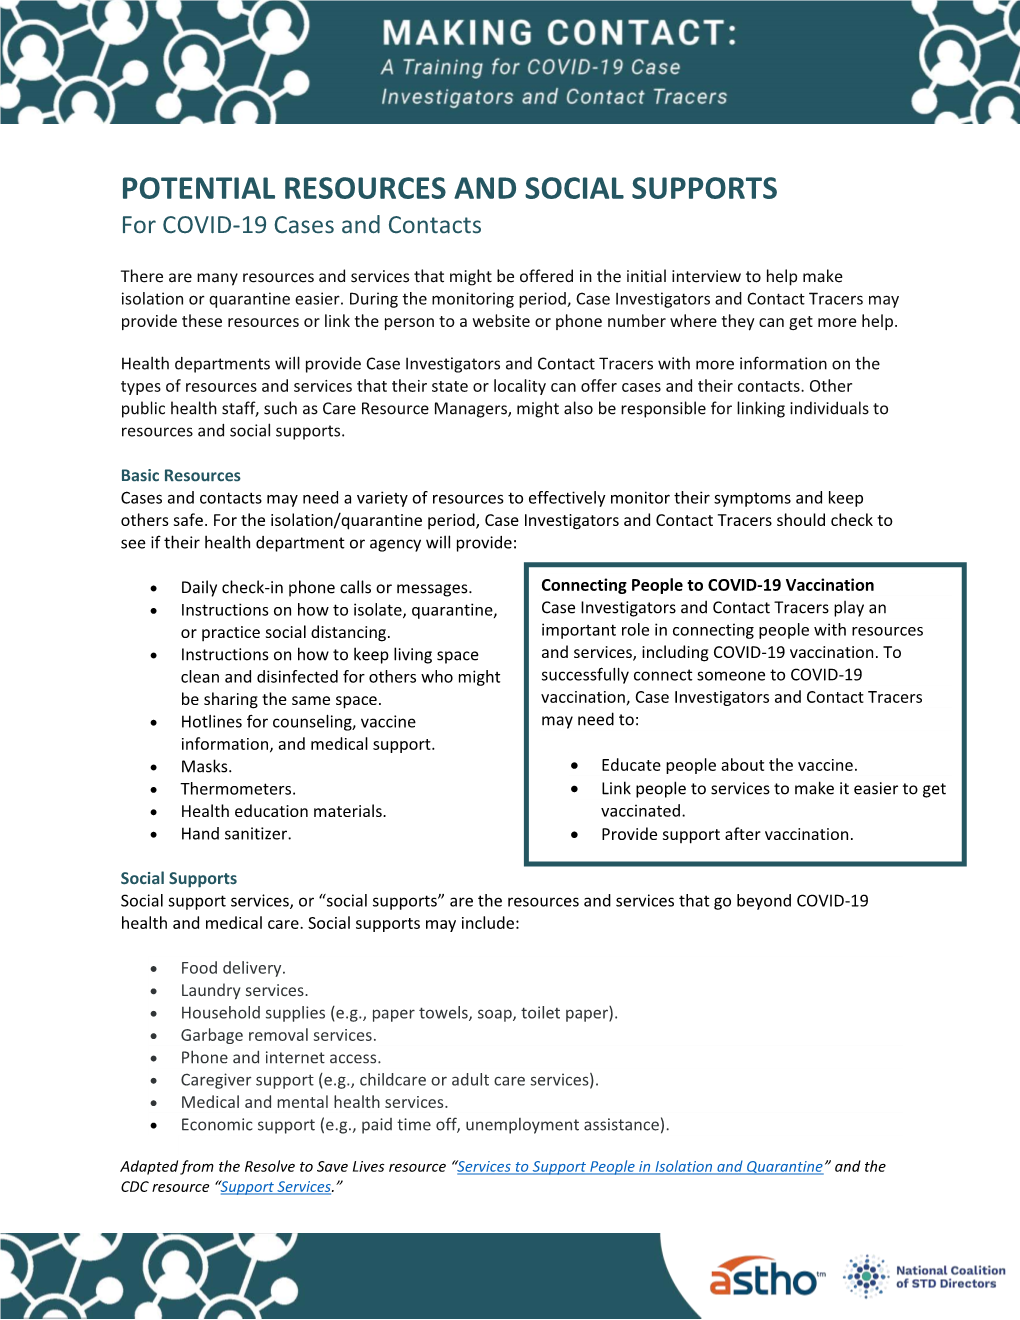 POTENTIAL RESOURCES and SOCIAL SUPPORTS for COVID-19 Cases and Contacts